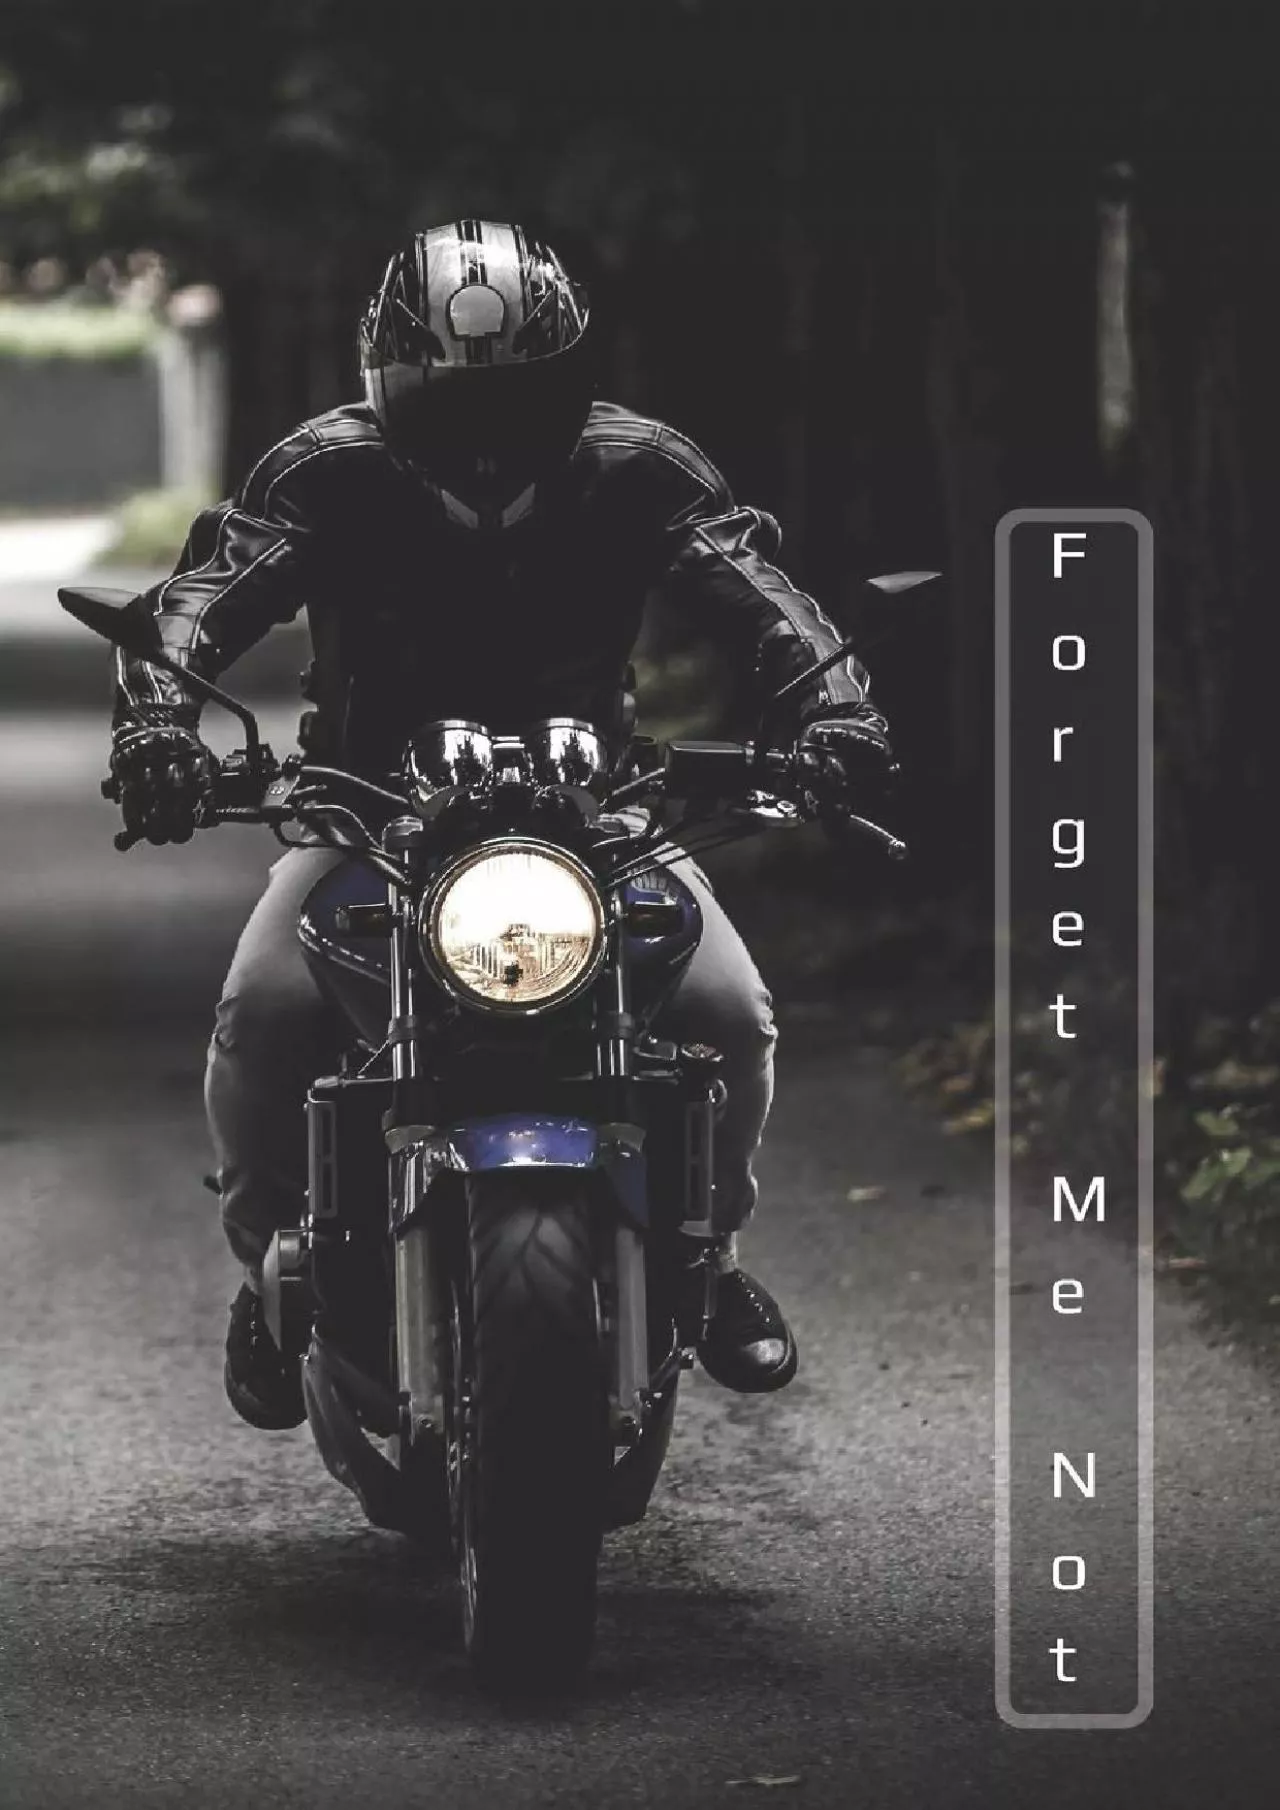 [DOWLOAD]-Forget Me Not: Black Motor Bike.Motercycle.Internet Password Logbook with alphabetical